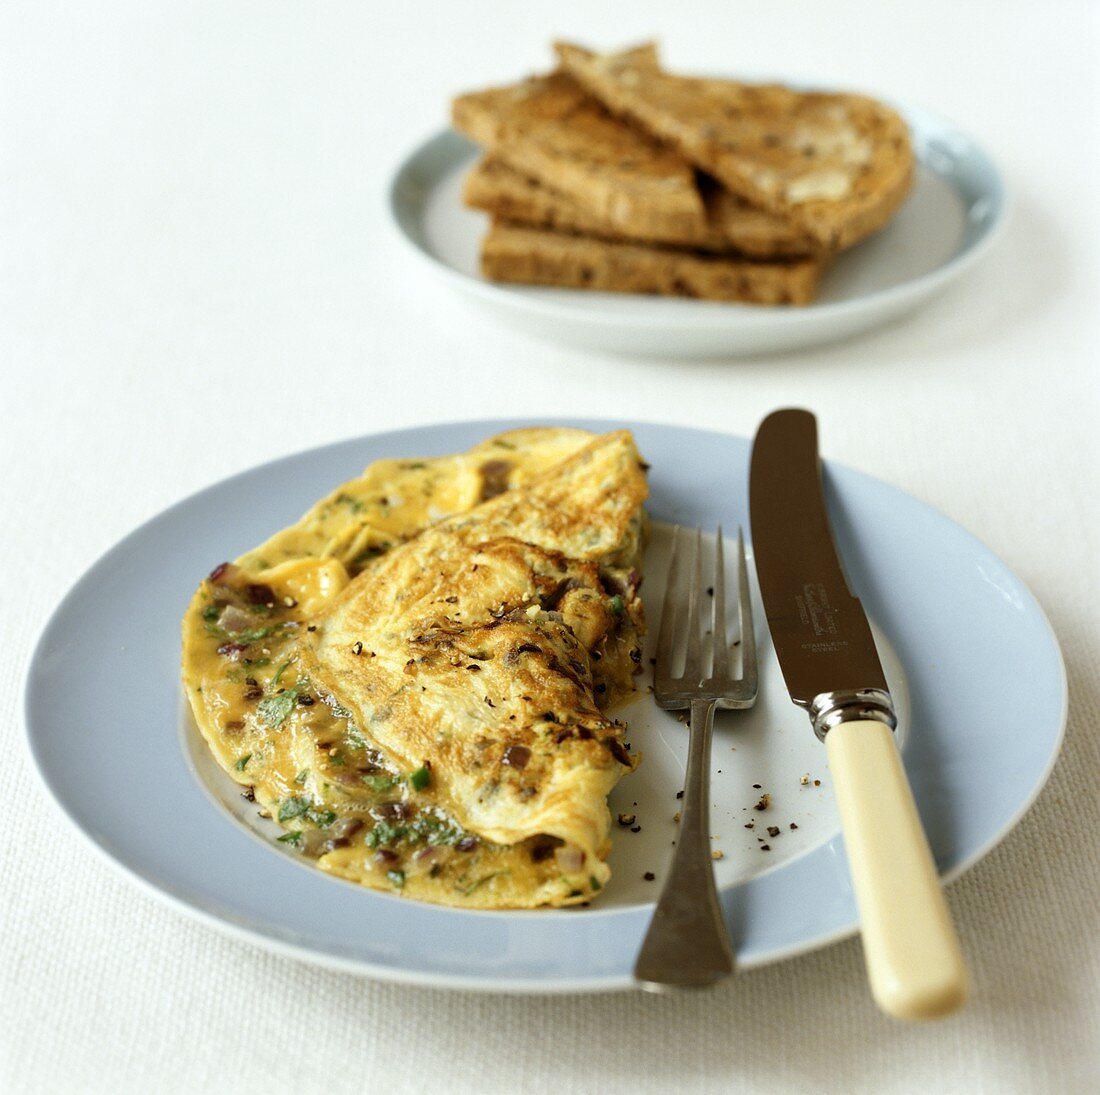 Spicy omelette with chopped green chillies and coriander